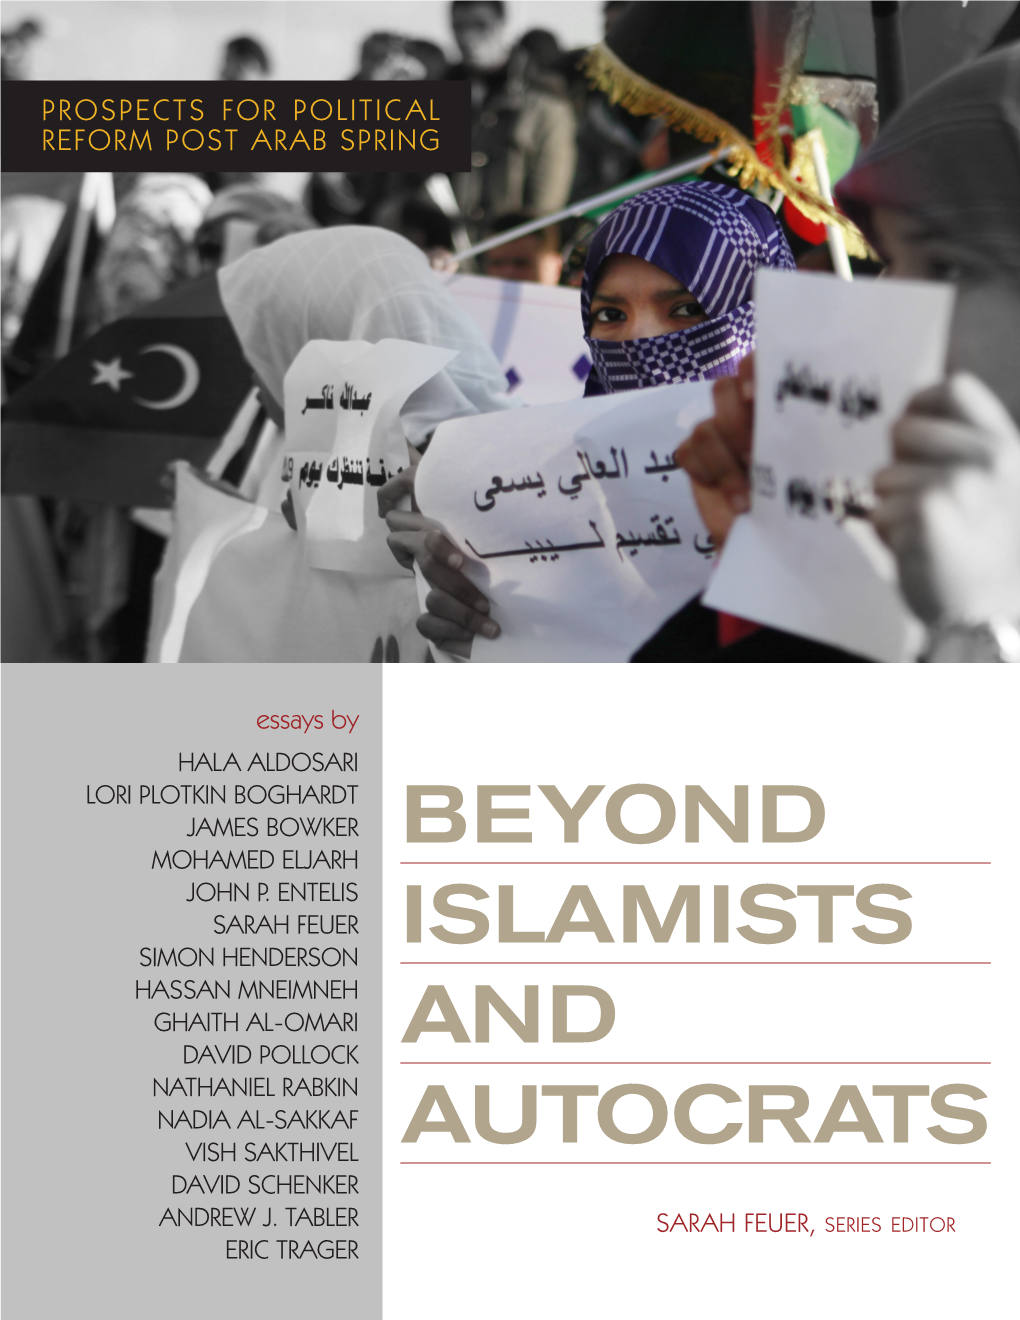 Beyond Islamists and Autocrats